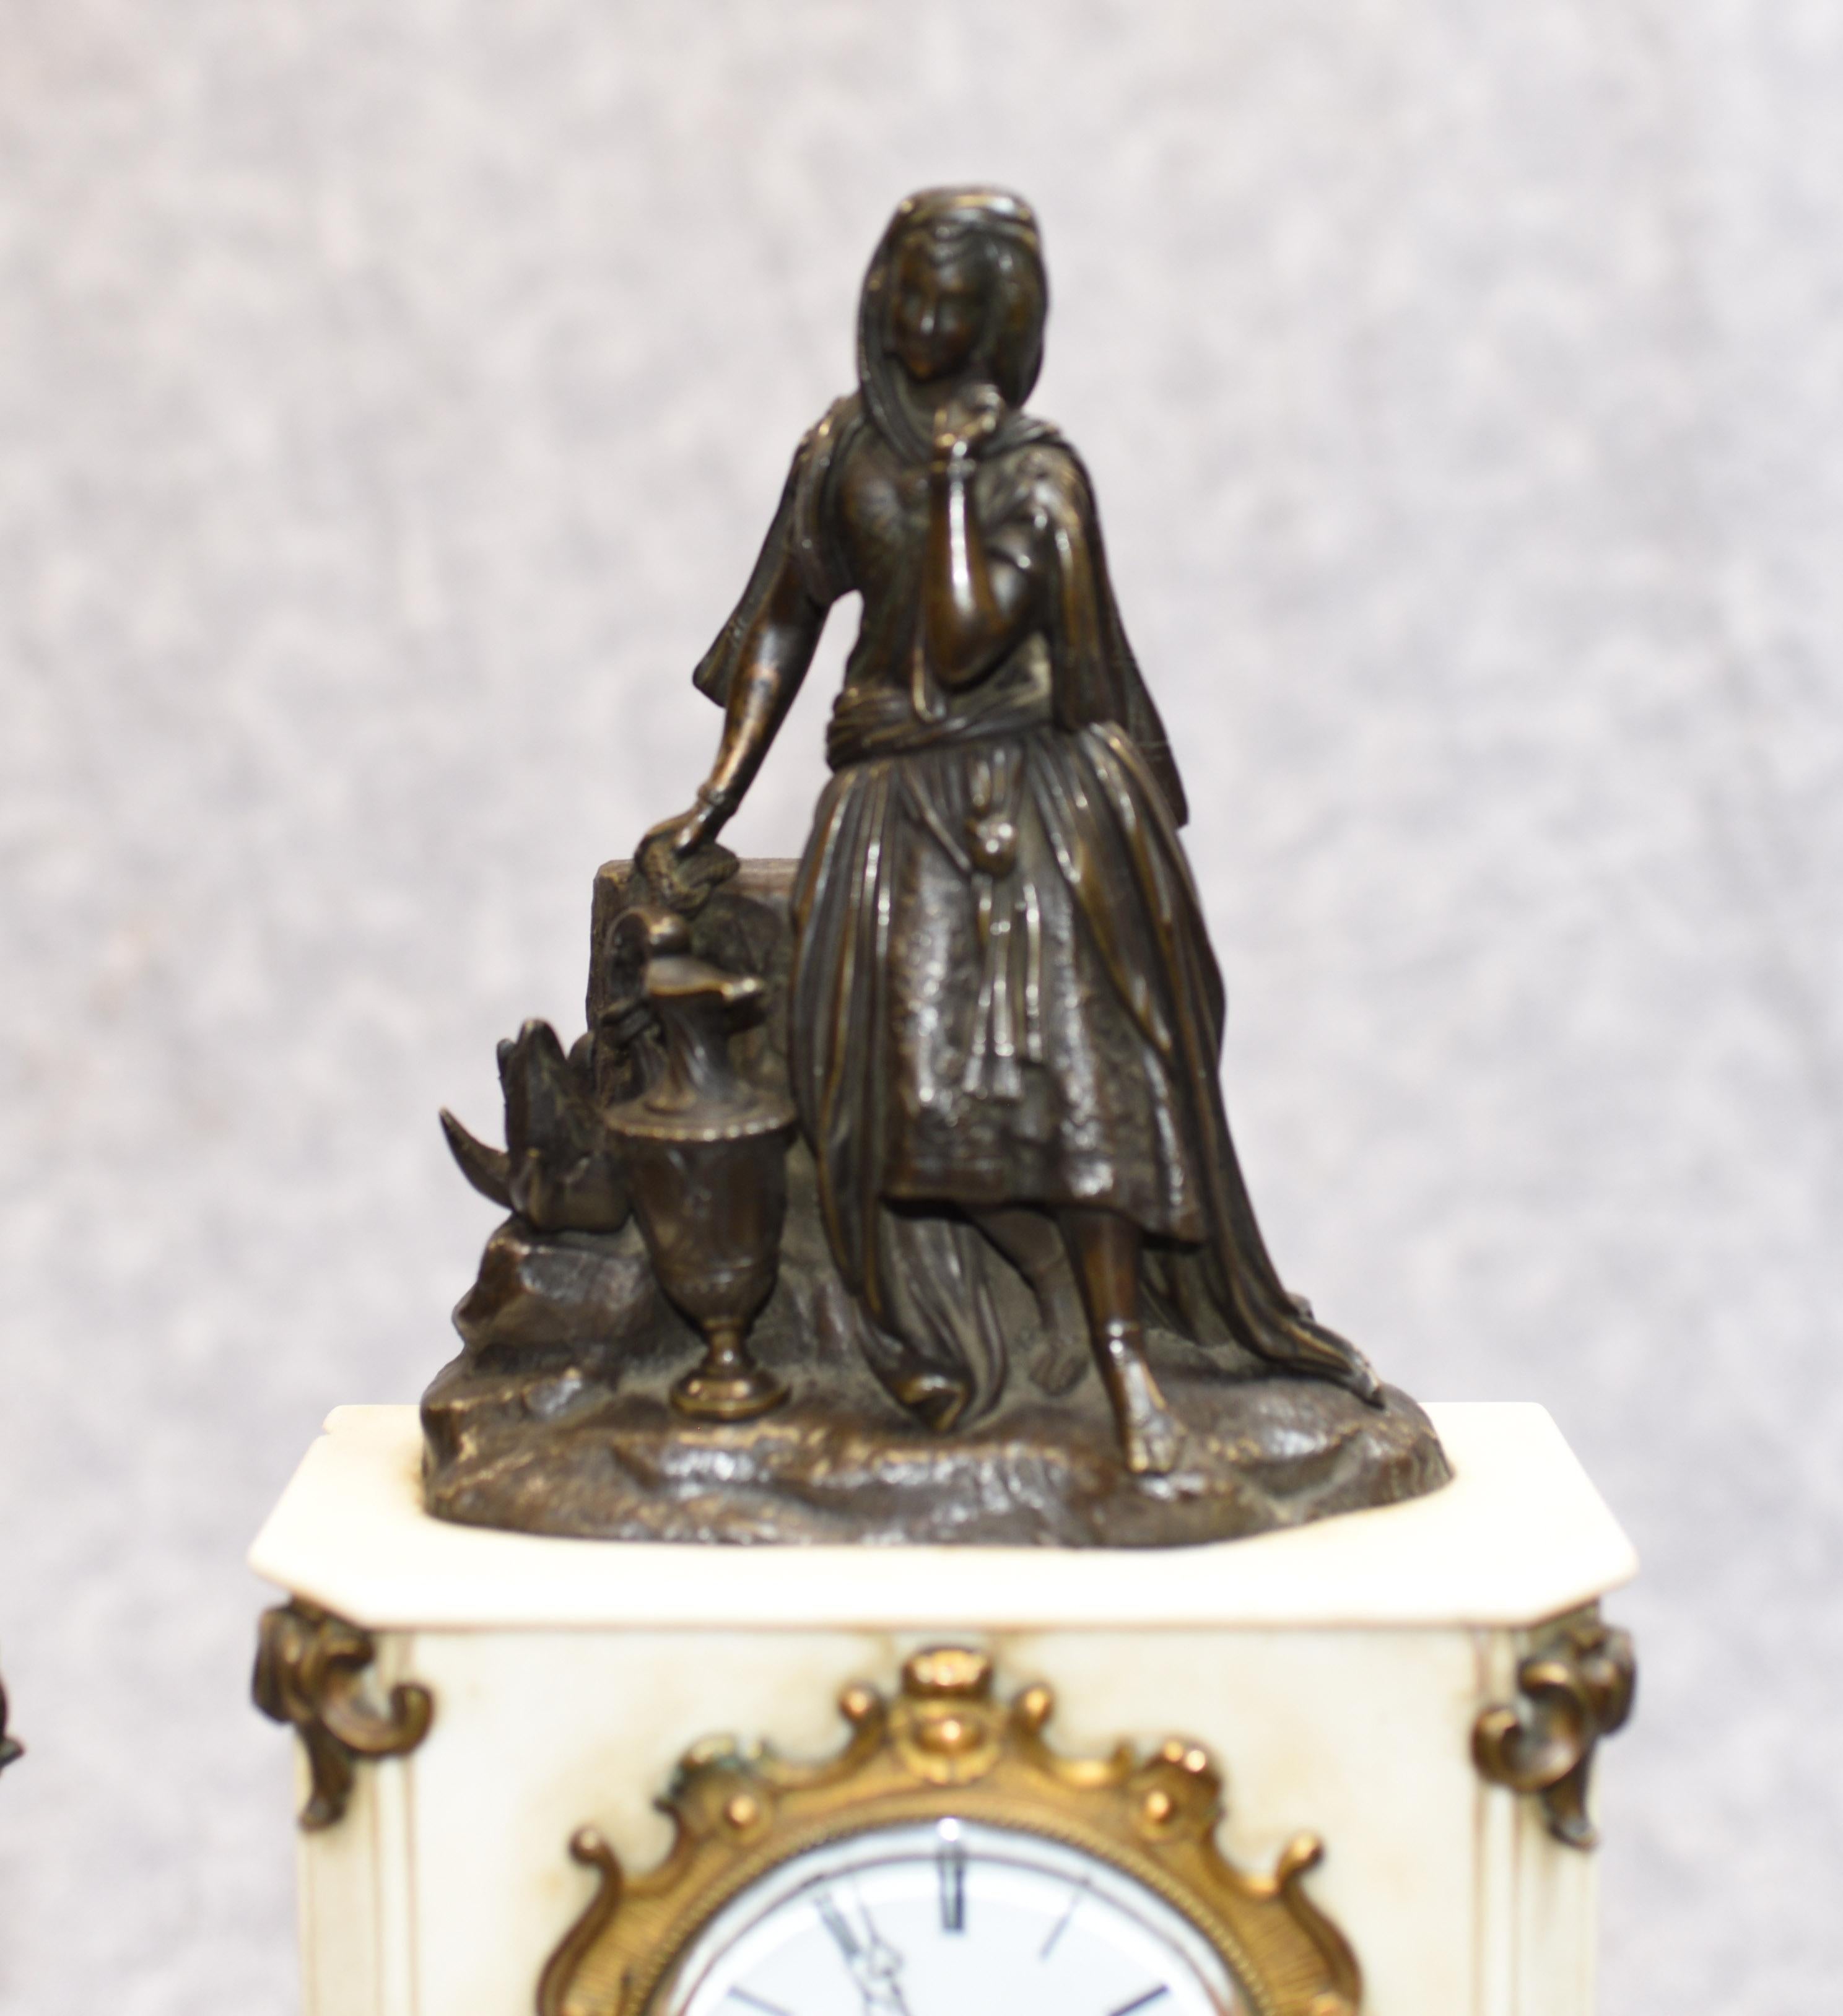 - Gorgeous French Empire antique clock set
- Mantle clock is flanked by two bronze urns on pedestals
- Clock is surmounted by bronze female maiden figurine
- Great collectors piece and we date this clock garniture set to circa 1910
- Bought from